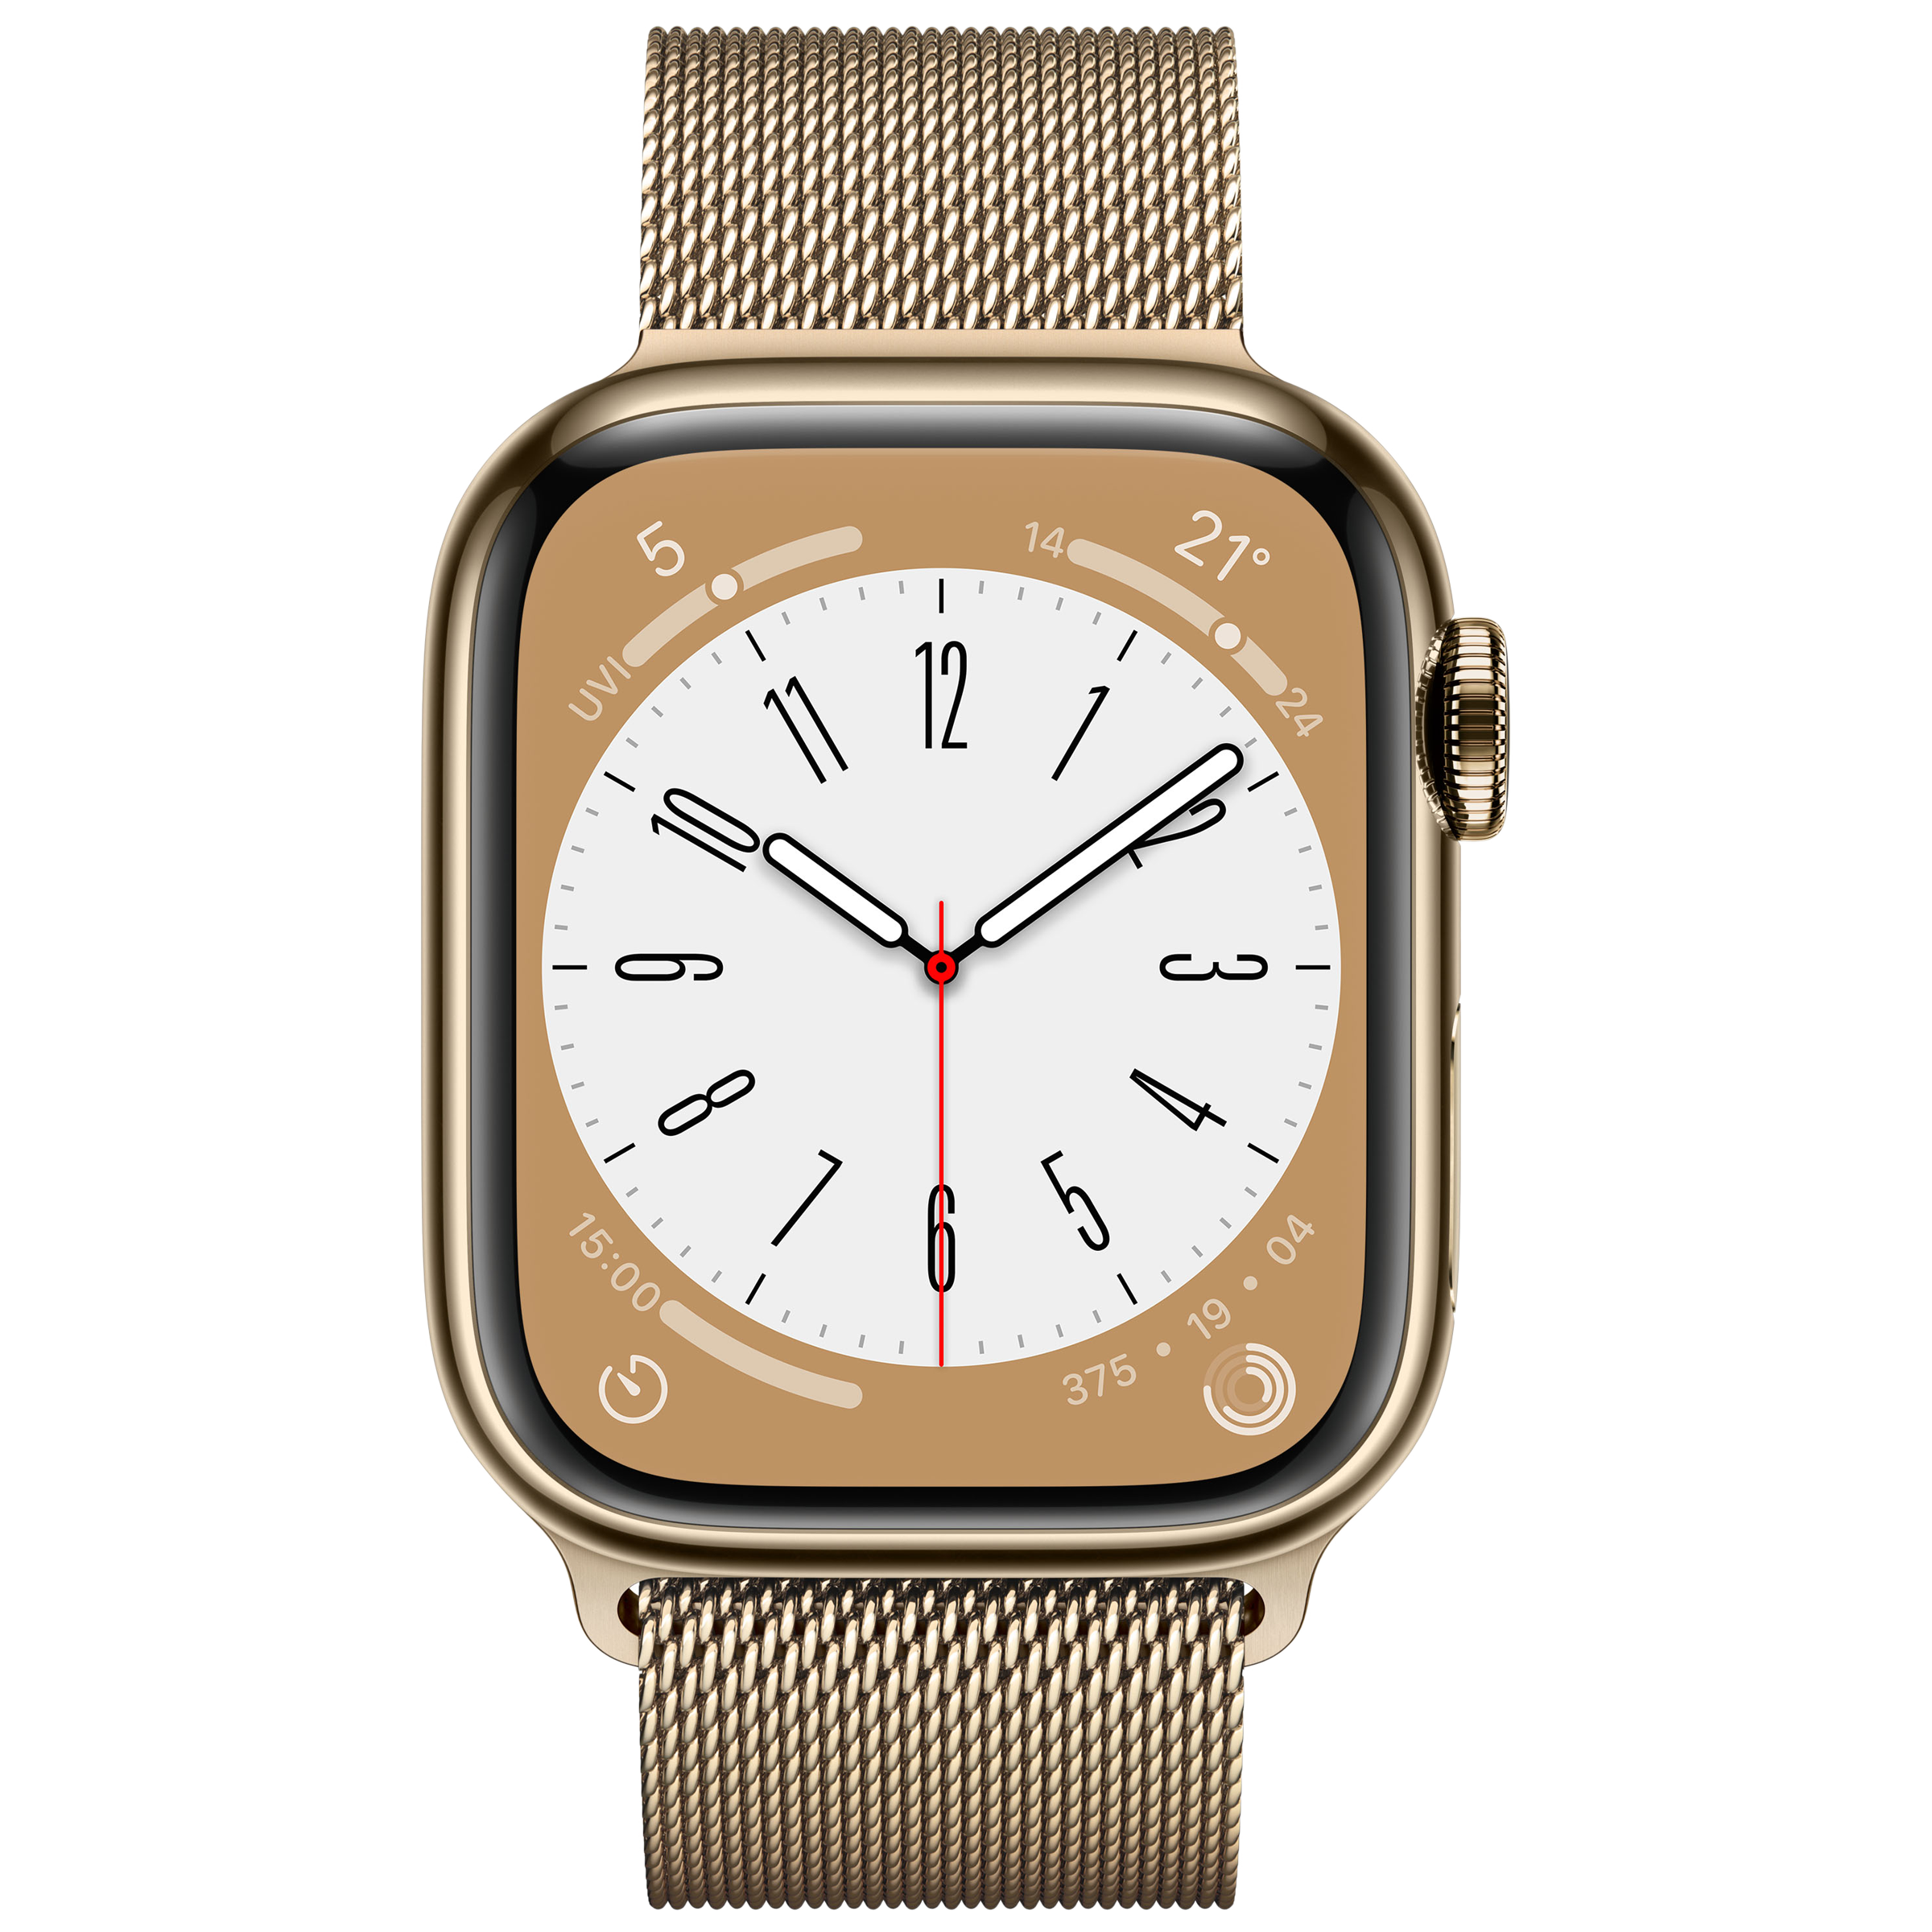 Apple Watch Series 8 with Milanese Loop (41mm Retina LTPO OLED Display, Gold Stainless Steel Case)_1